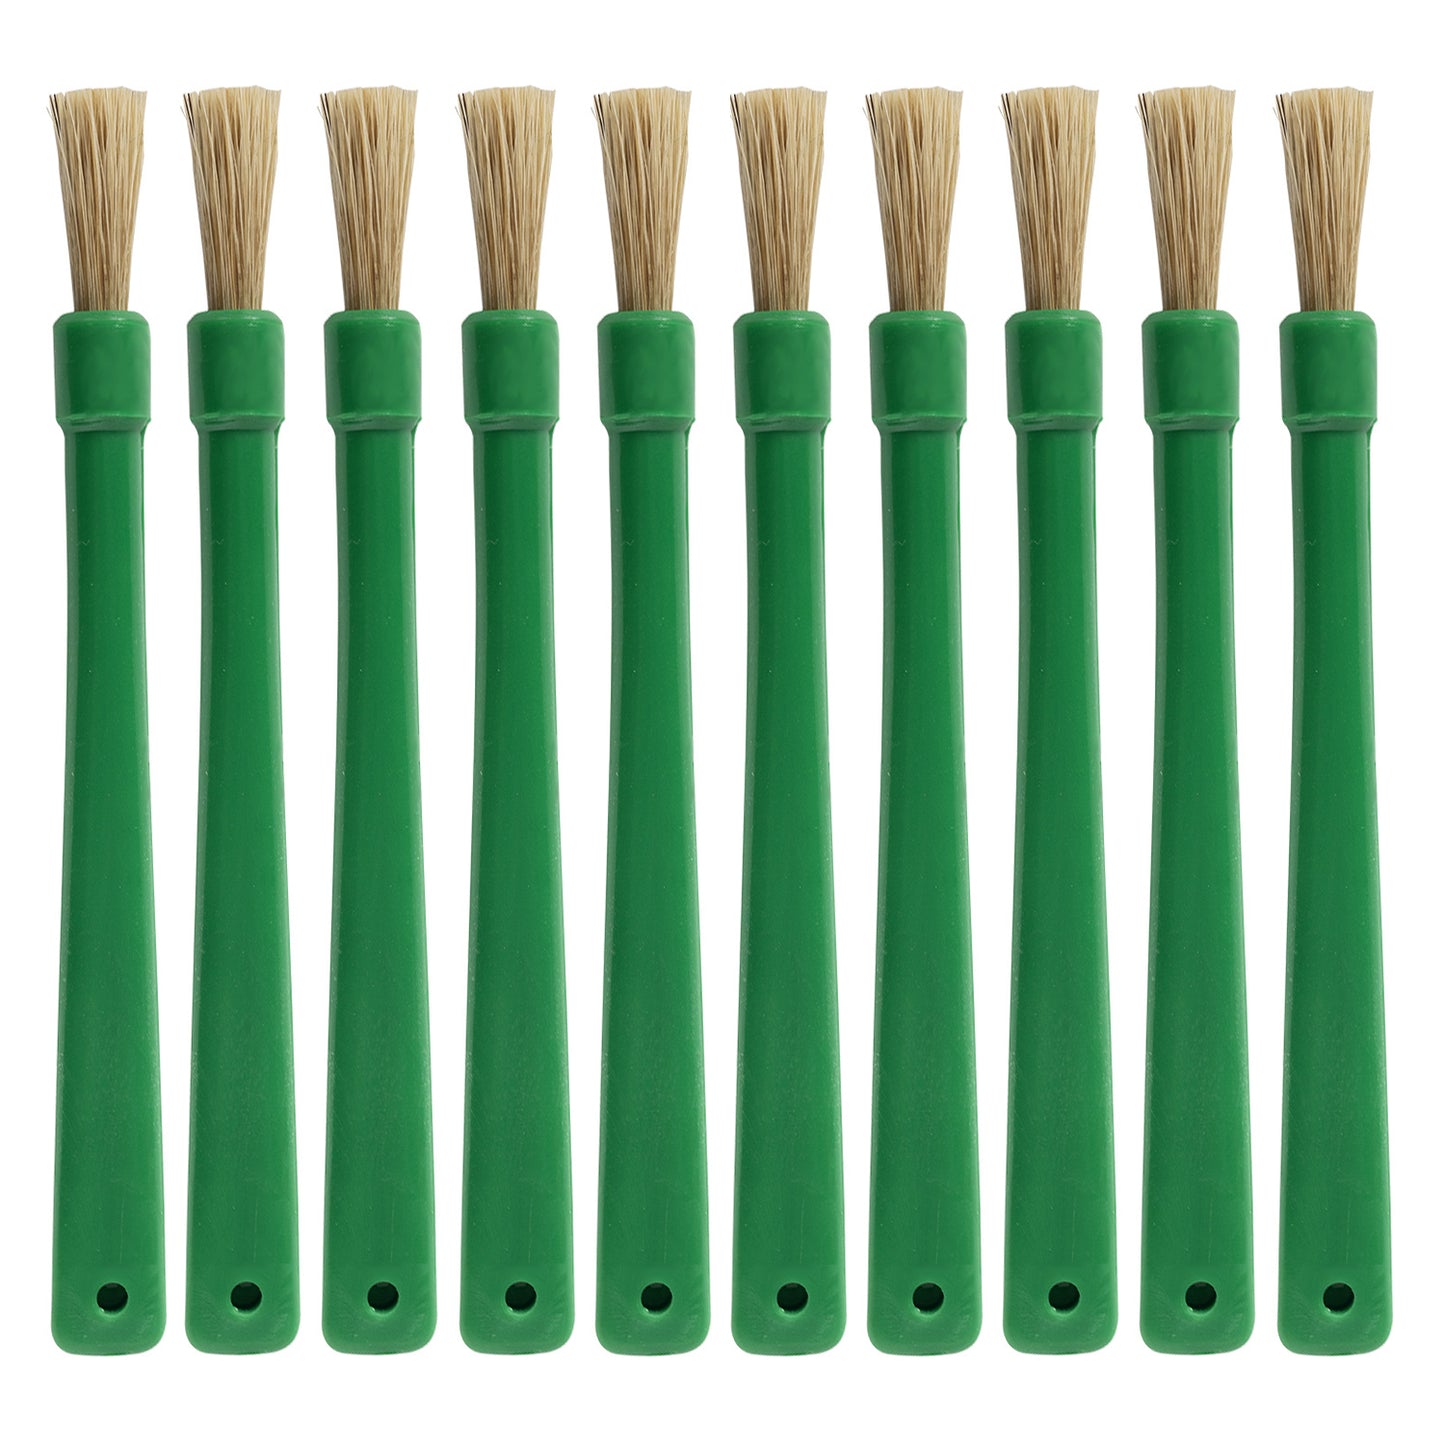 Selects - Plastic Flux or Glue Brush / Brushes - Pack of 10